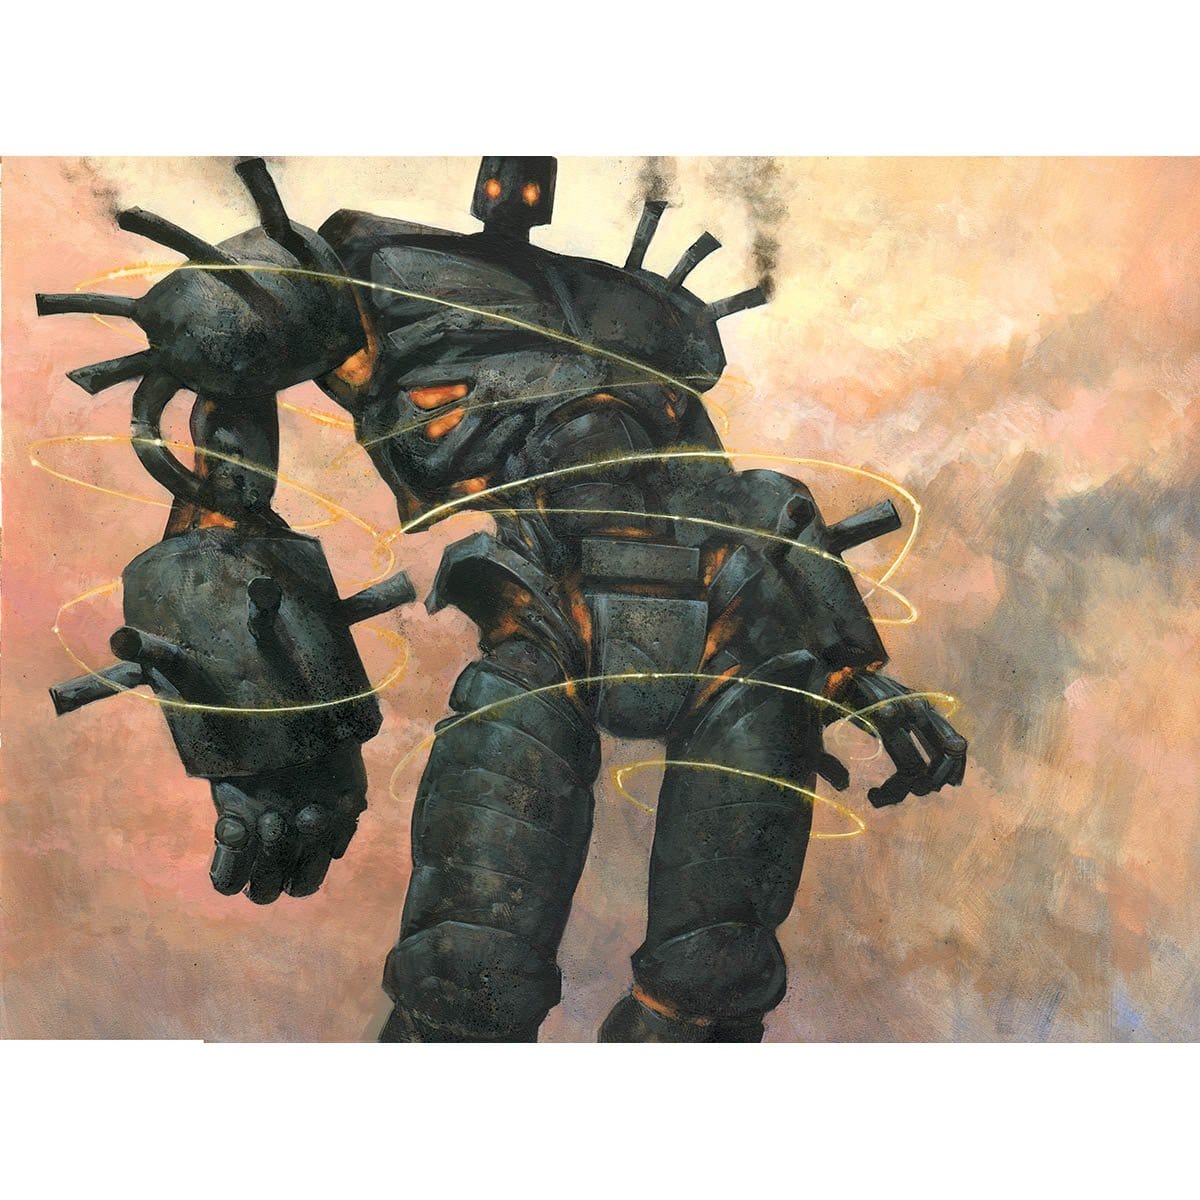 Darksteel Colossus Print - Print - Original Magic Art - Accessories for Magic the Gathering and other card games